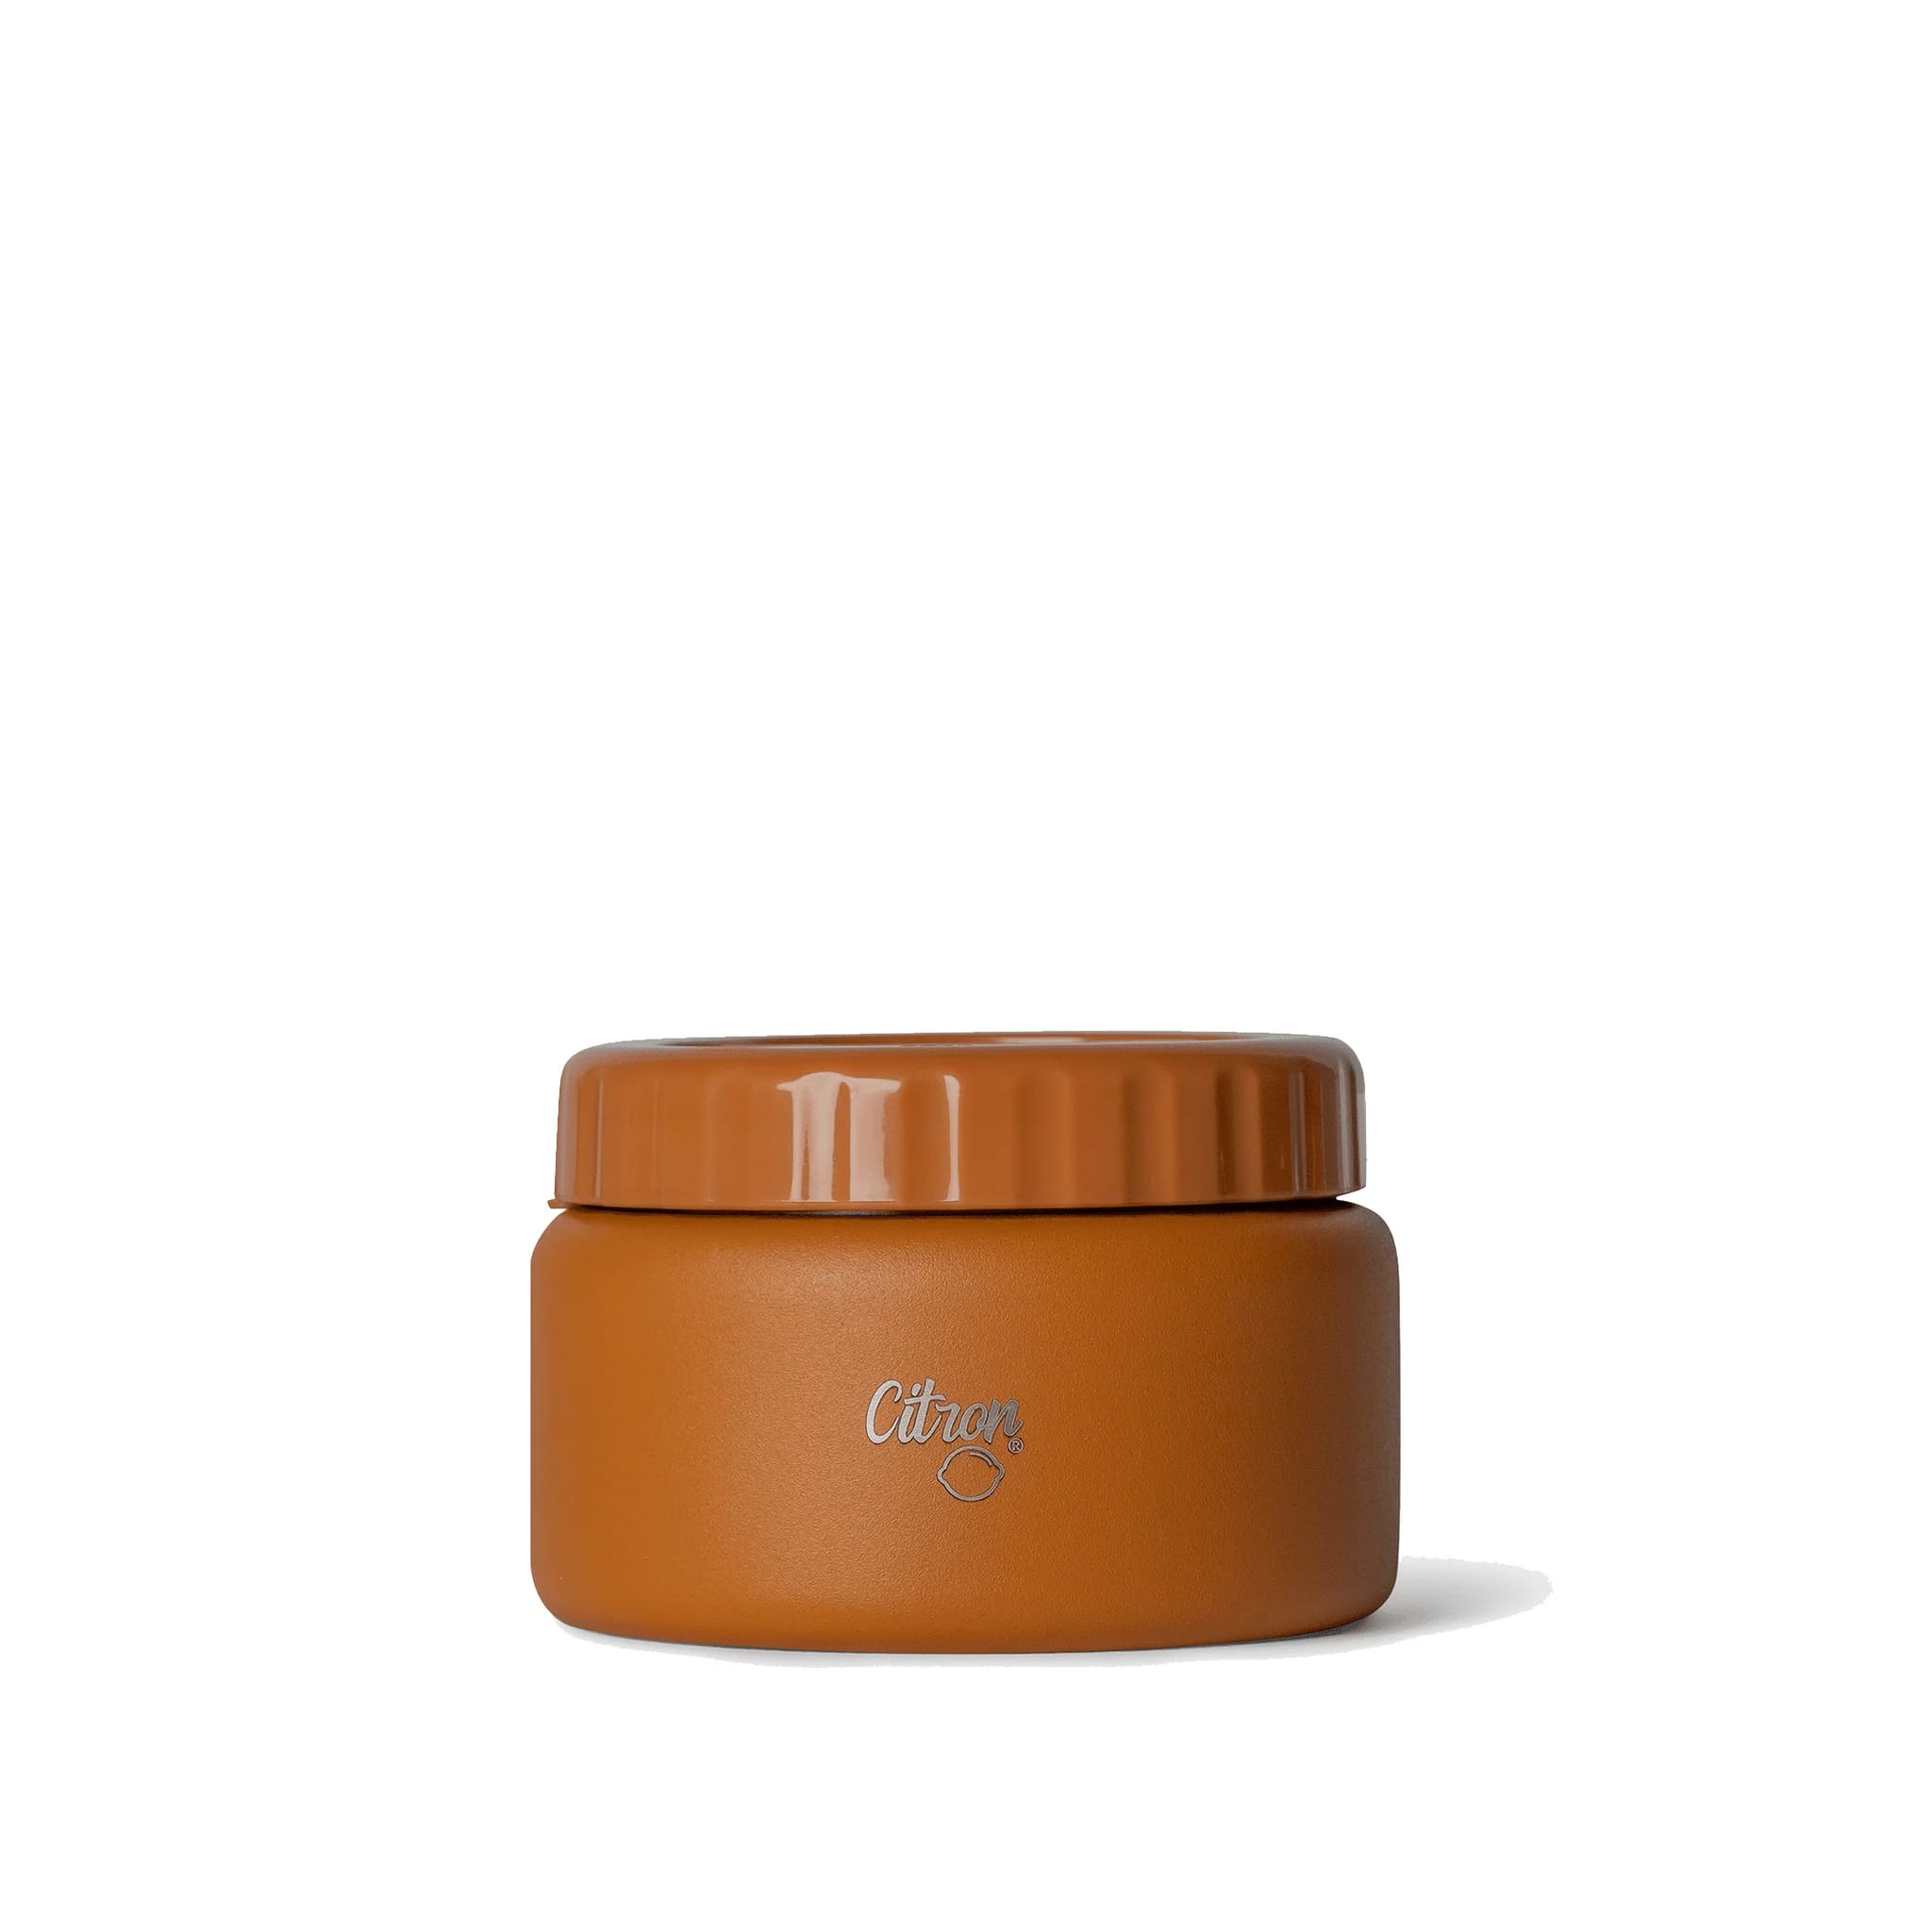 Citron Stainless Steel Insulated Food Jar 250ml - Caramel